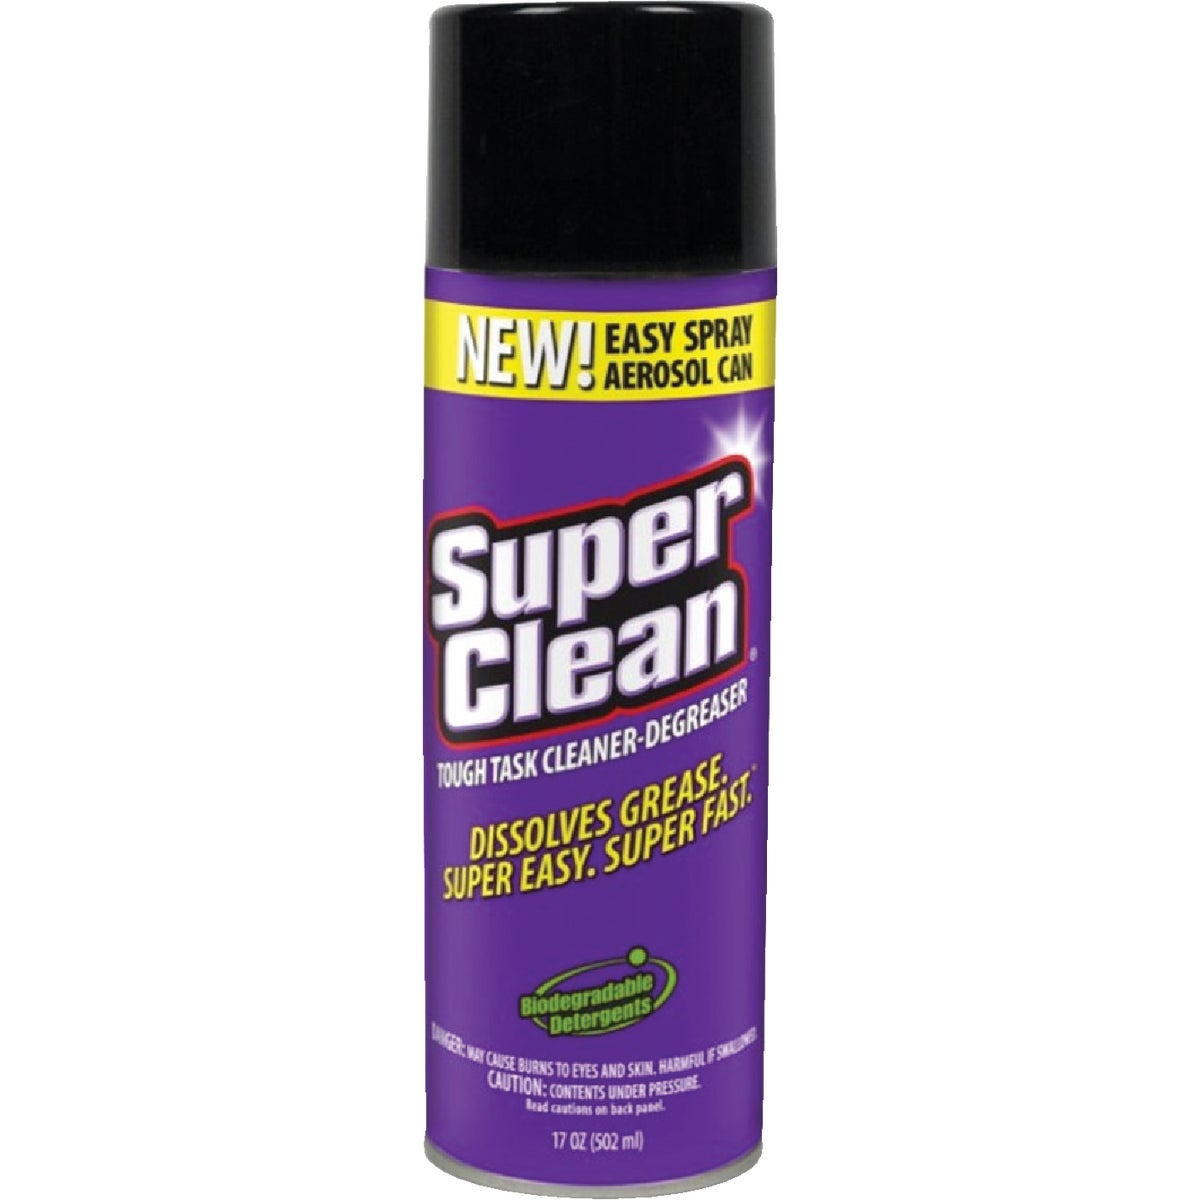 Item 570510, SuperClean tough task cleaner degreaser provides an industrial strength 